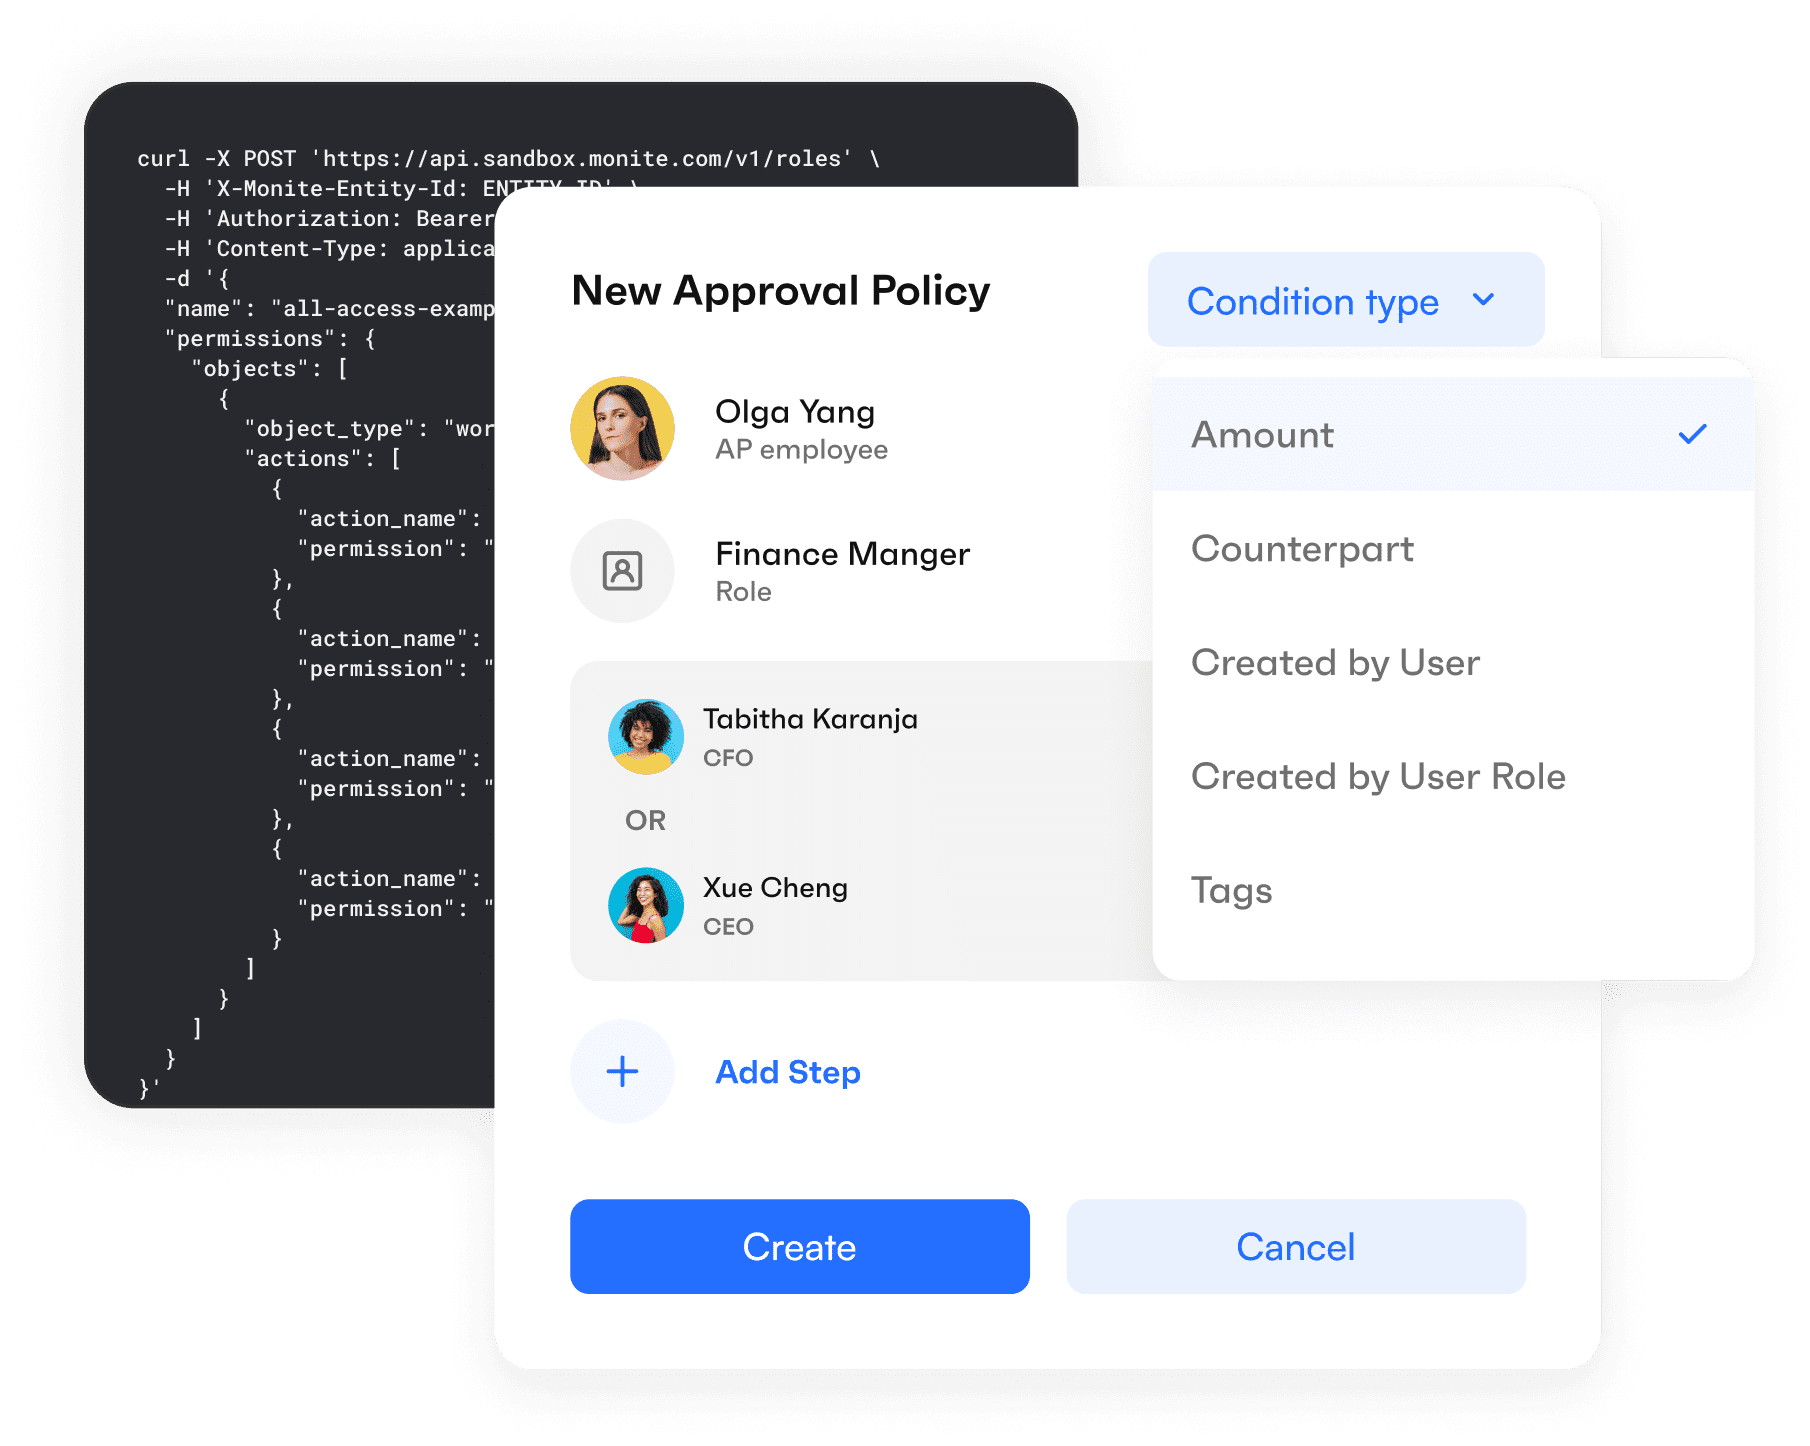 Users, roles, and permissions